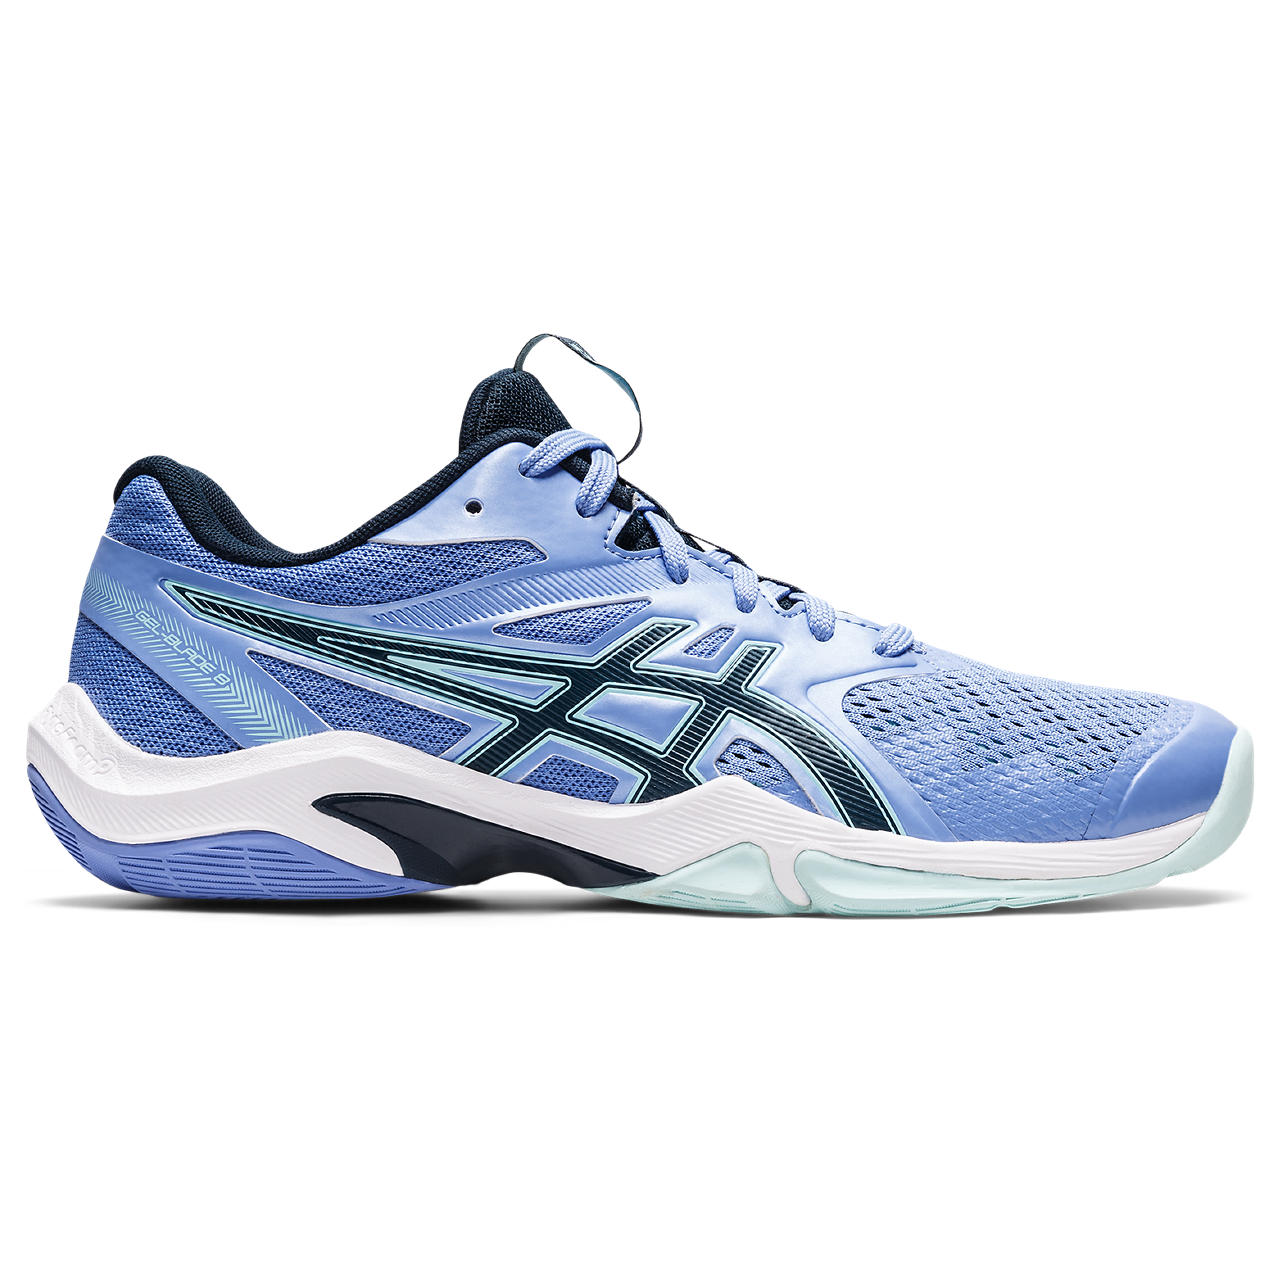 Asics Gel Blade 8 Women's Indoor Court Shoe (Periwinkle Blue/French ...